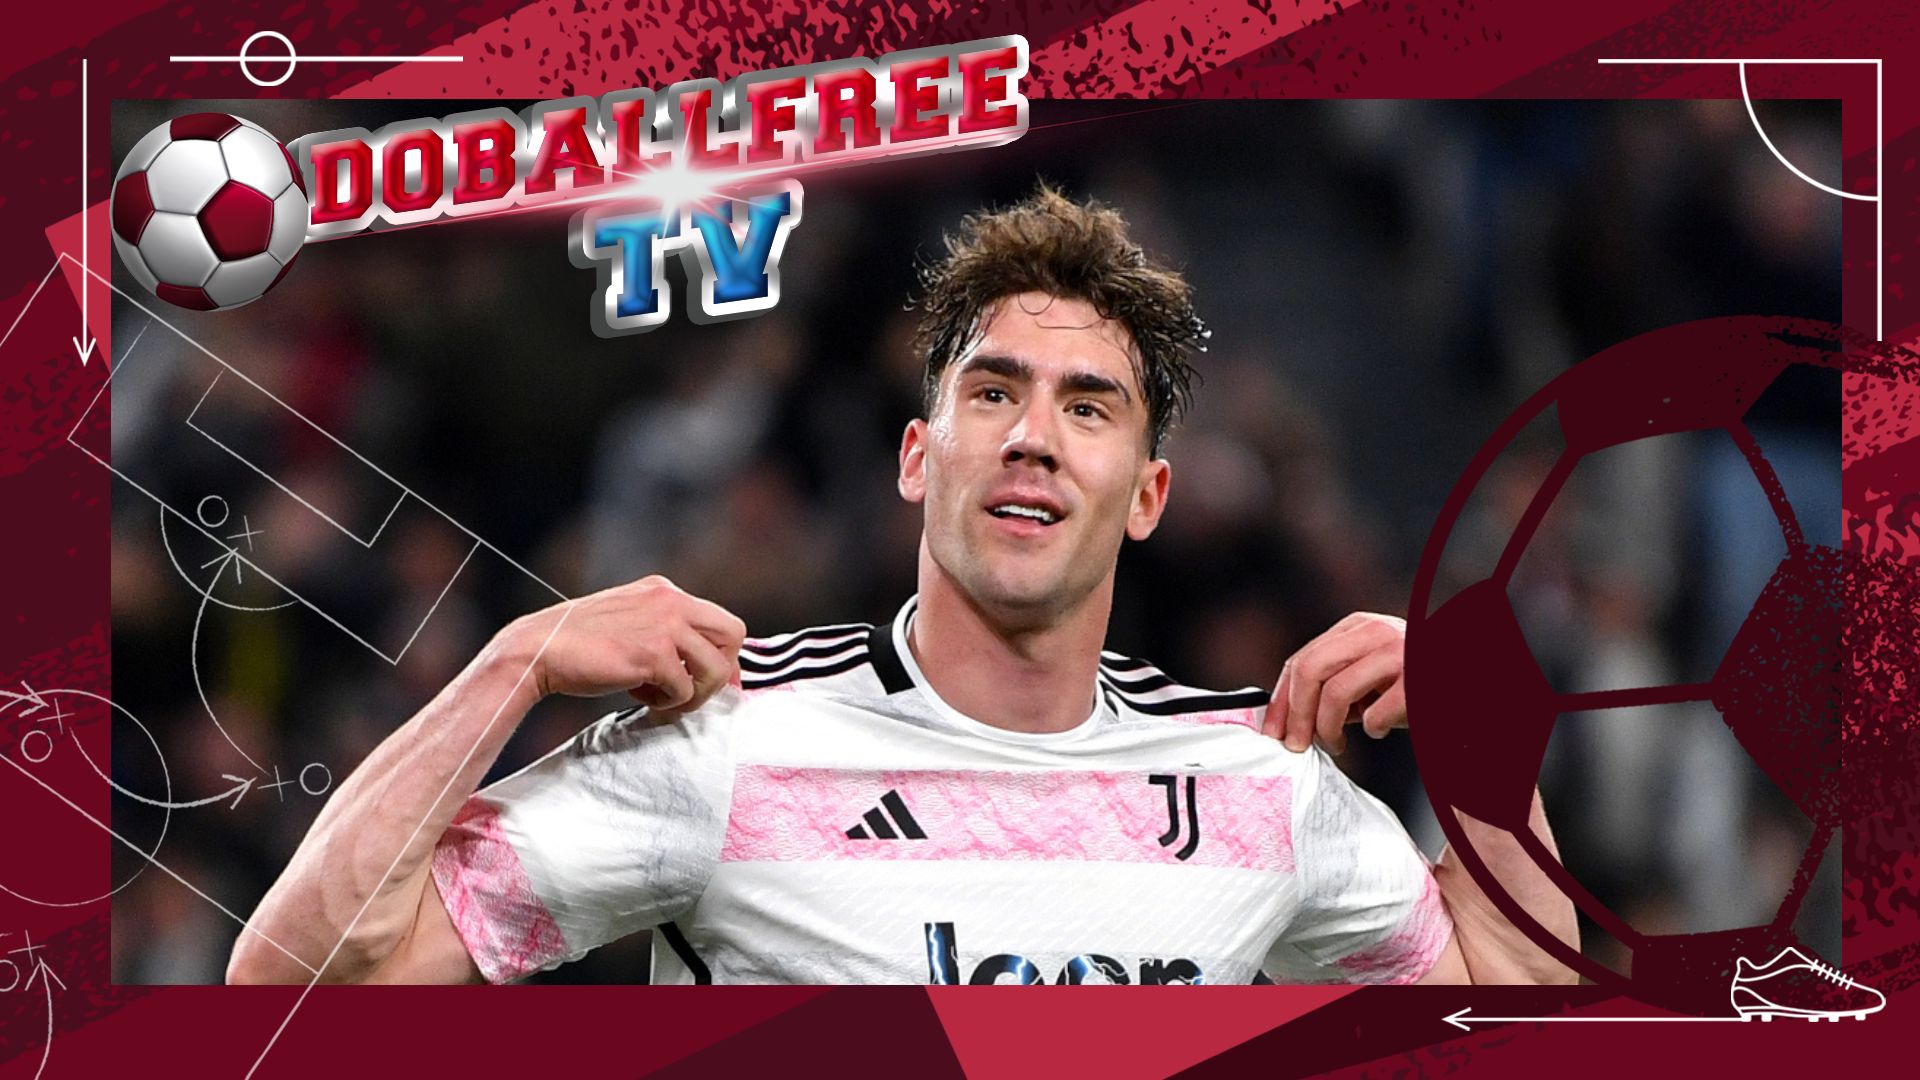 Dusan Vlahovic opens up that he has a tough job waiting for him in the second match against Lazio, even though he won the first match in the Coppa Italia semi-finals.